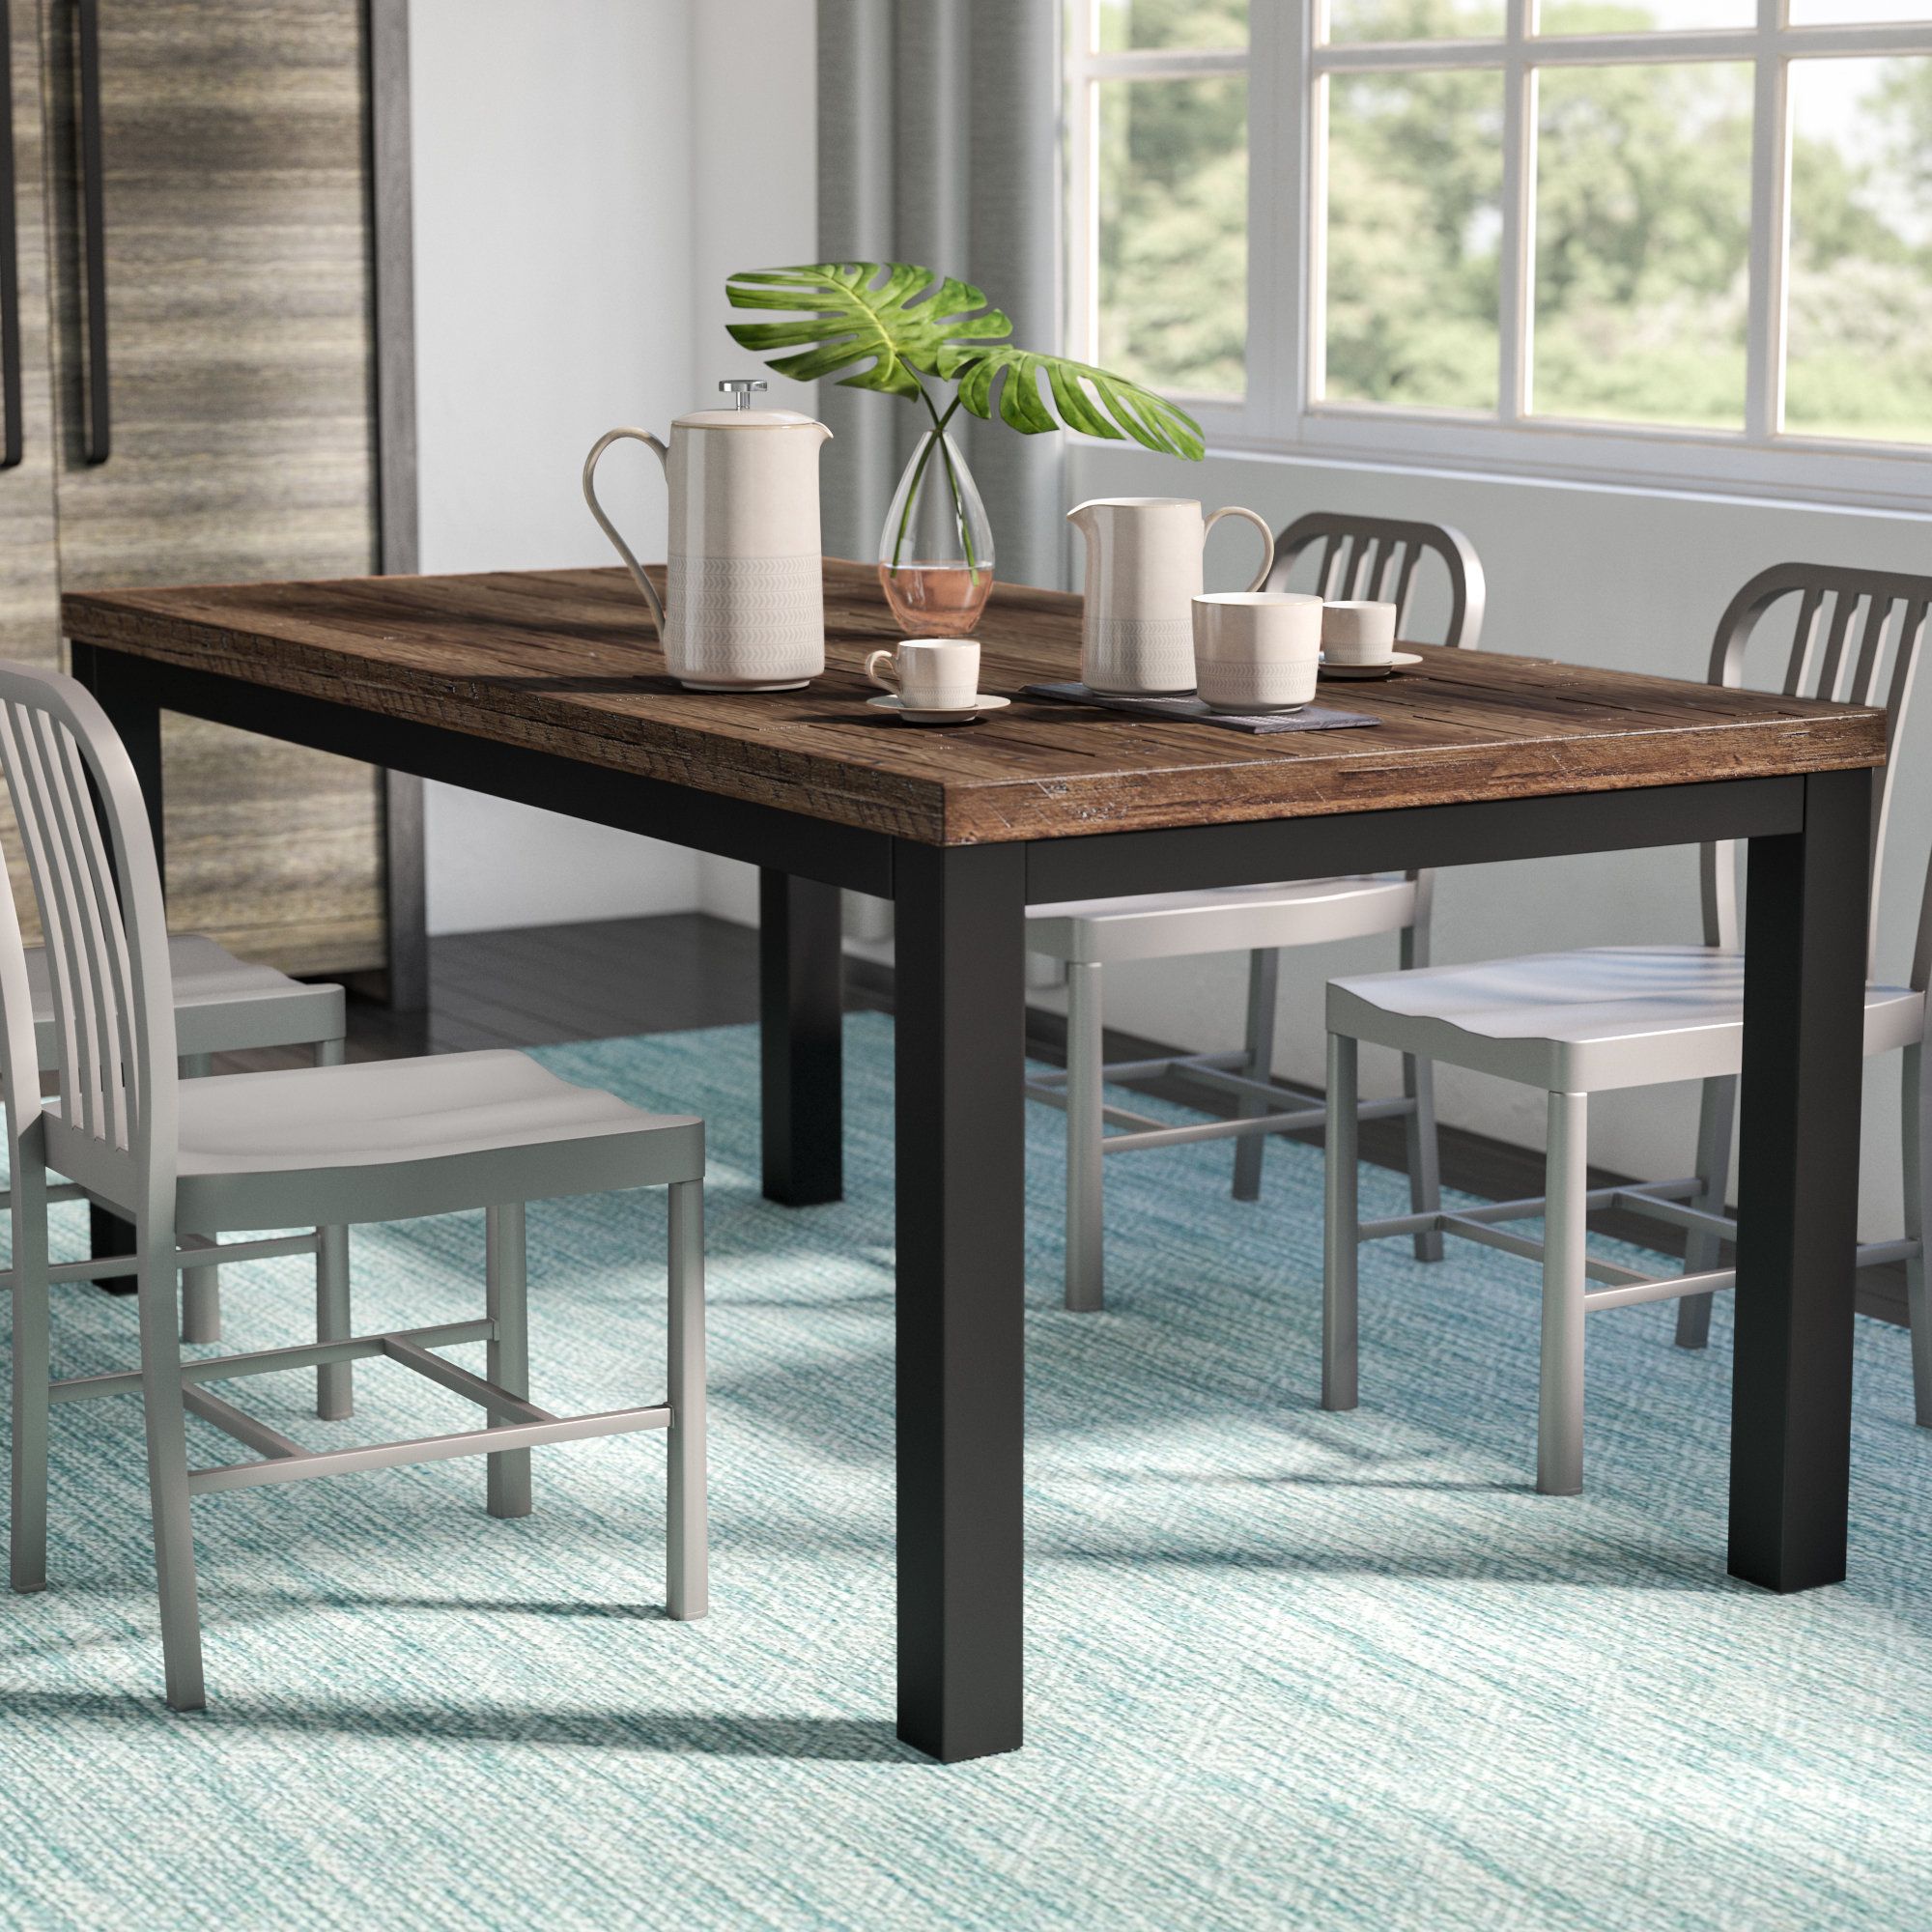 Fashionable Langley 5 Piece Dining Set & Reviews (View 11 of 20)